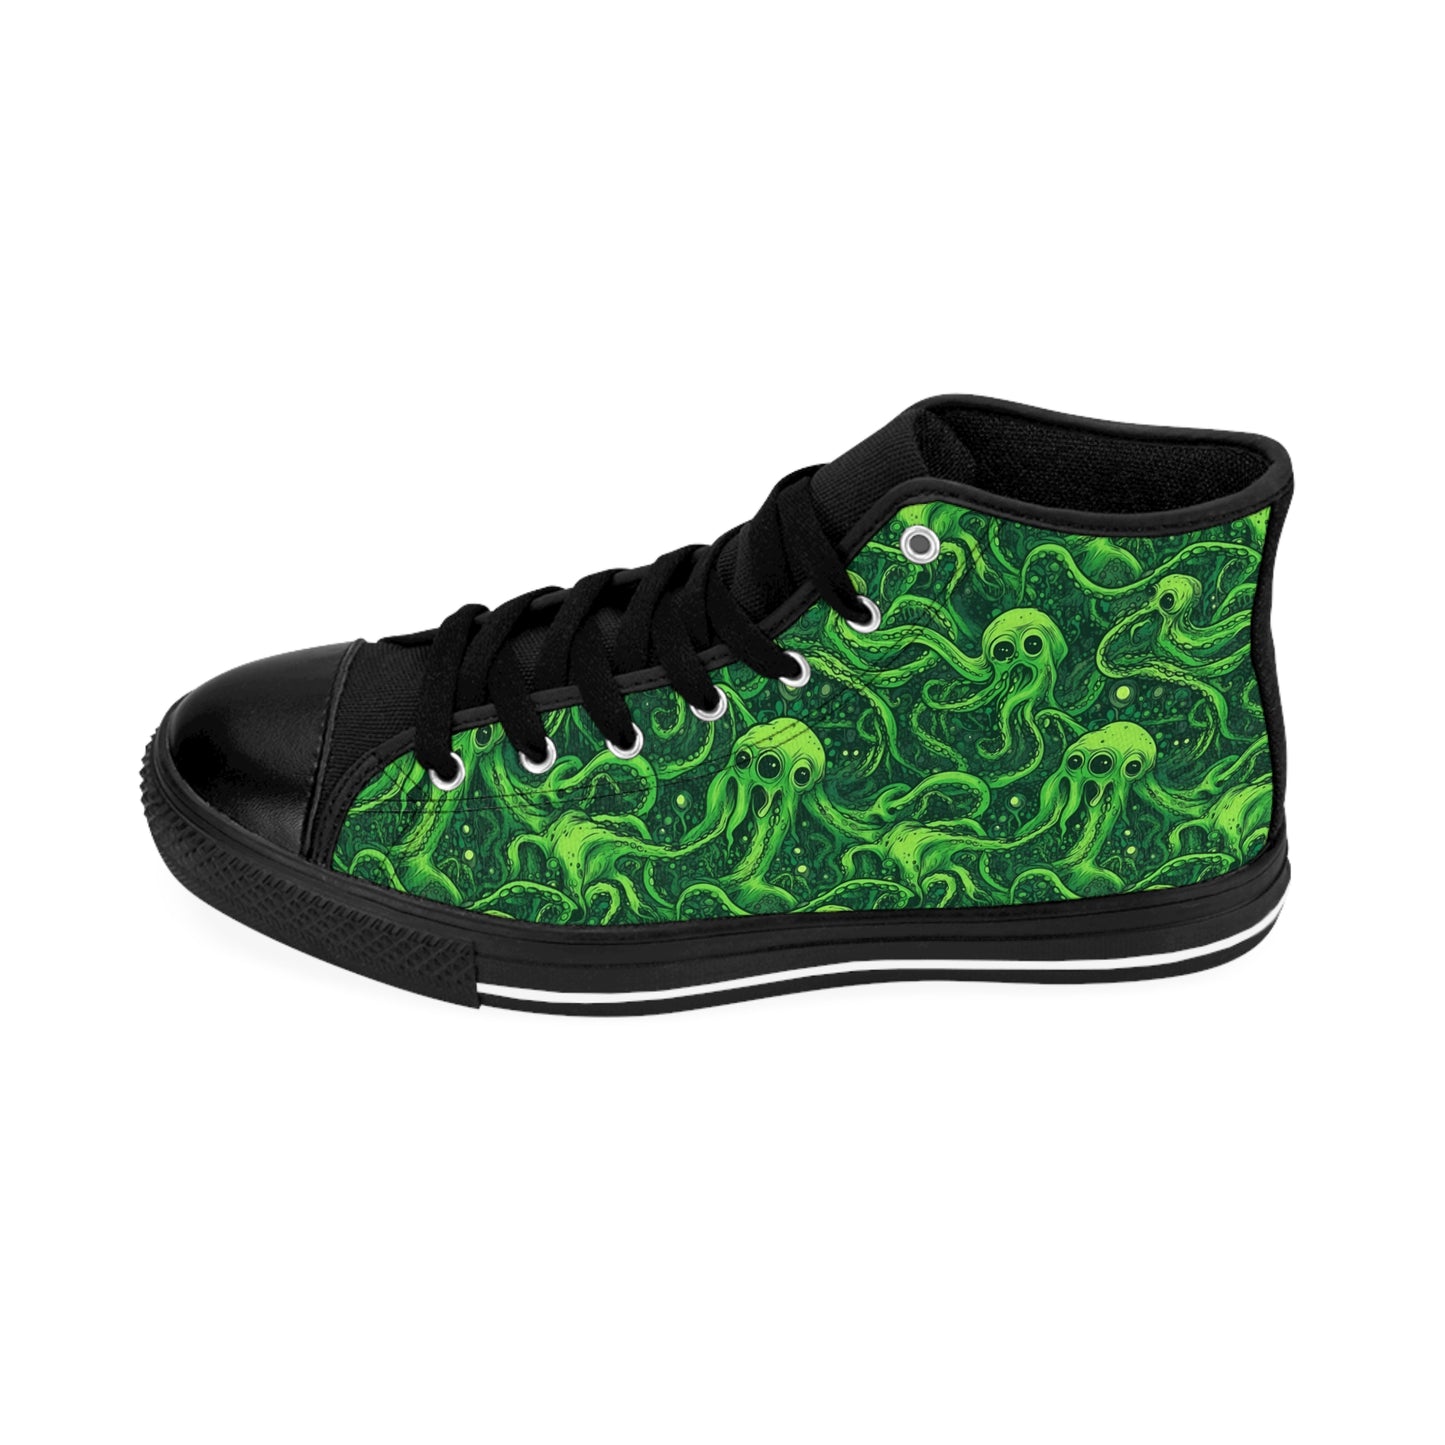 Classic sneakers Greeny tentacles horror - Frogos Design